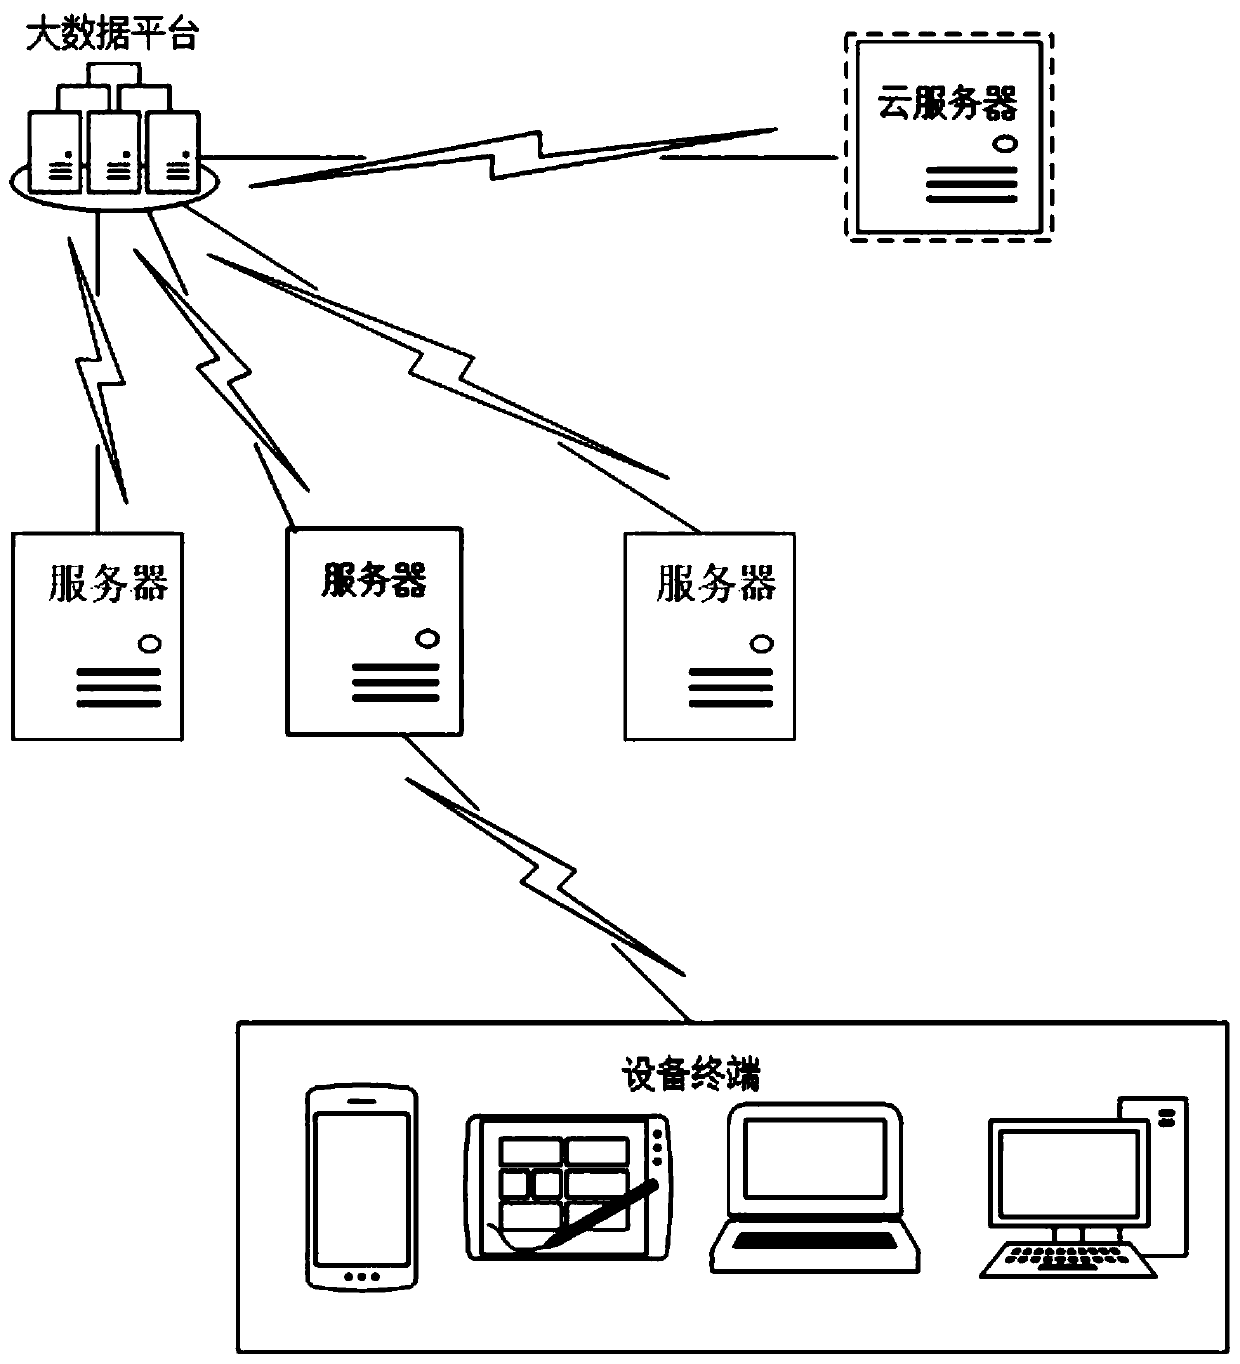 Remote data management method and system for security operation and maintenance service platform